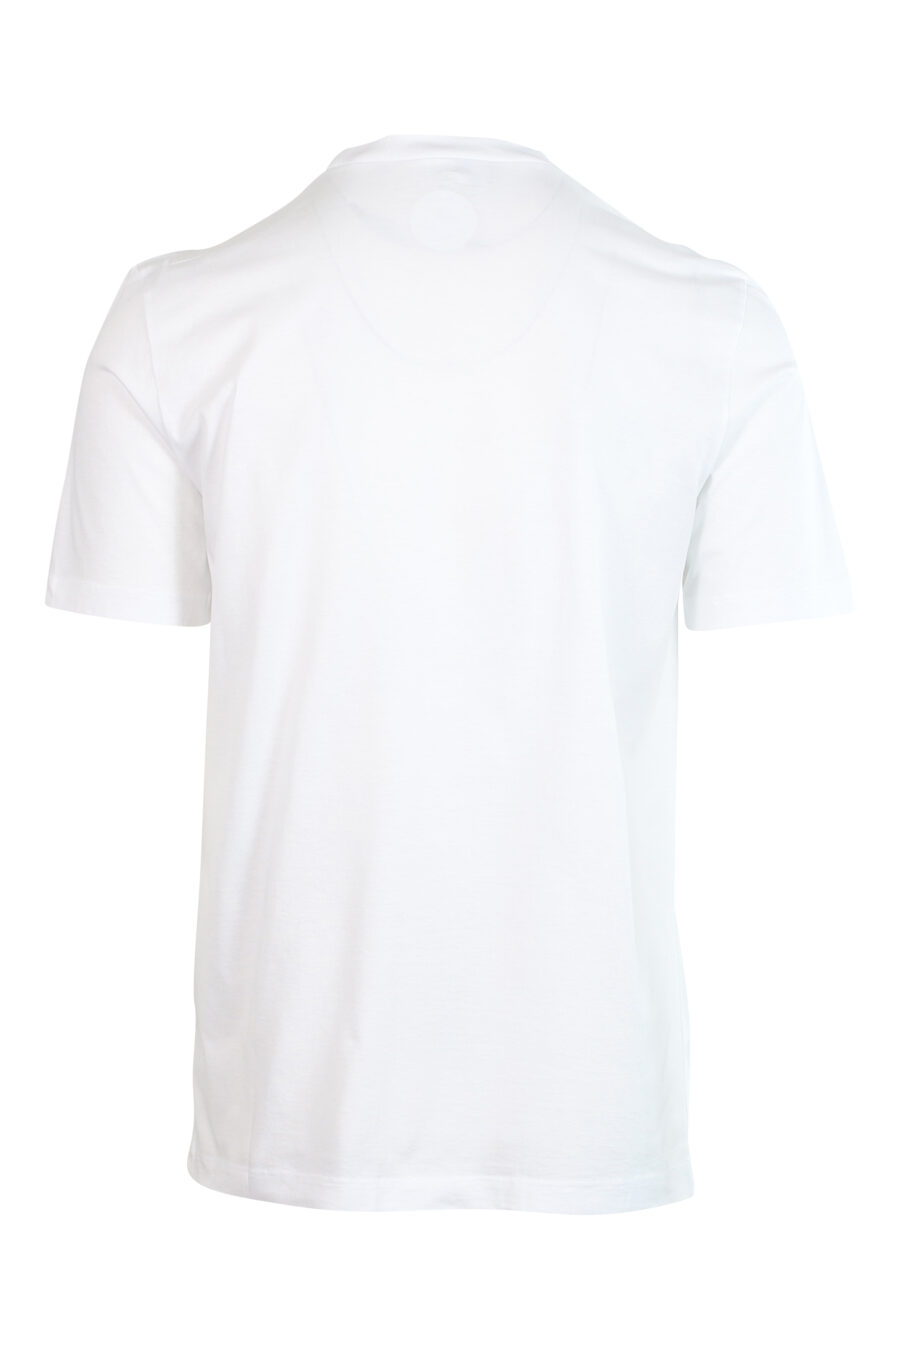 White T-shirt with black minilogue "bold" and orange leaf - 8052134990148 2